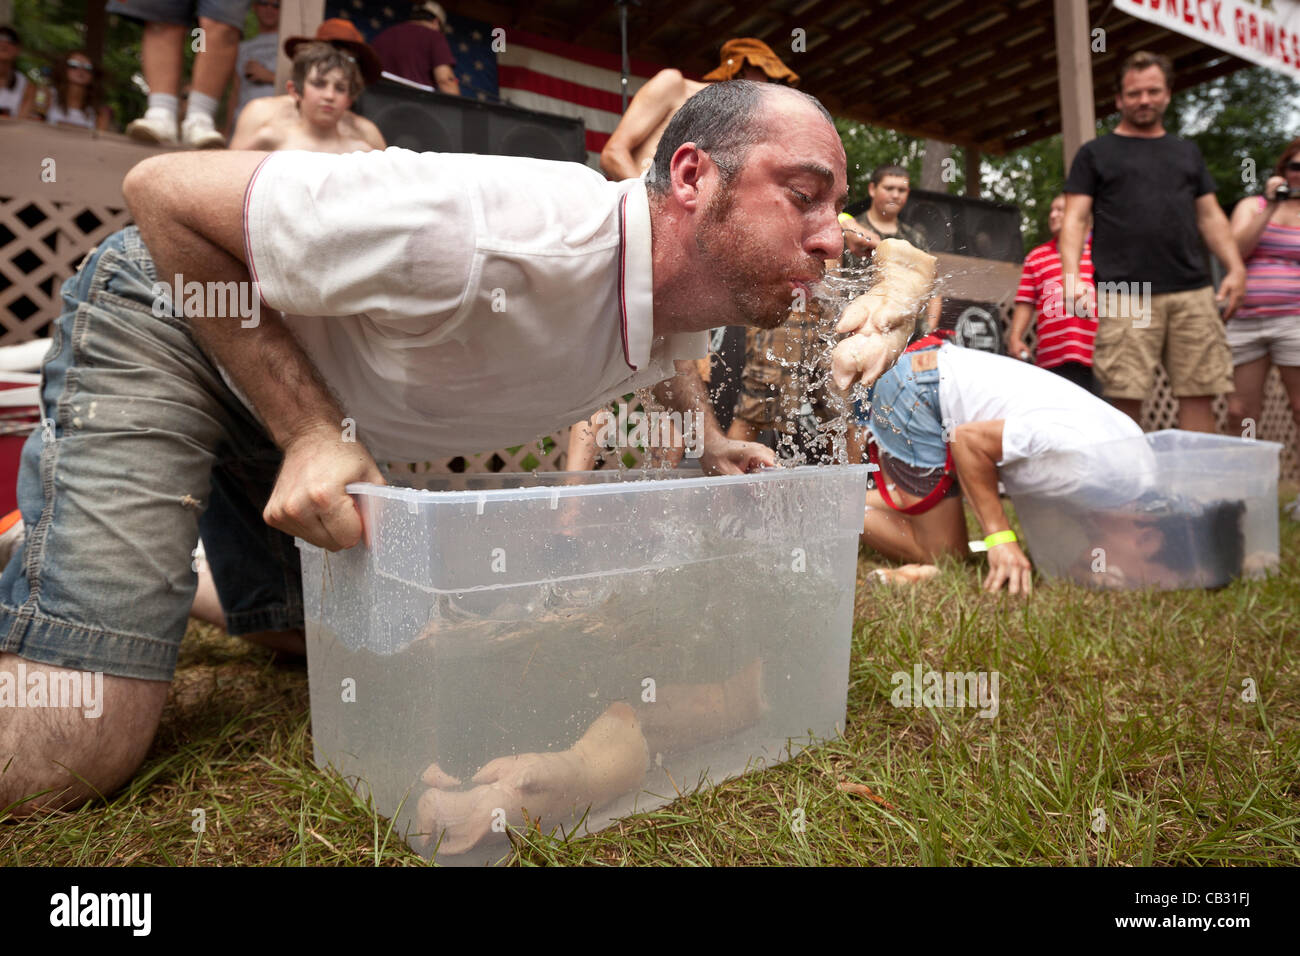 A competitor spits out a pigs foot during the dunking for pigss feet competition at the Red Neck Summer Games on May 26, 2012 in East Dublin, Georgia. Stock Photo